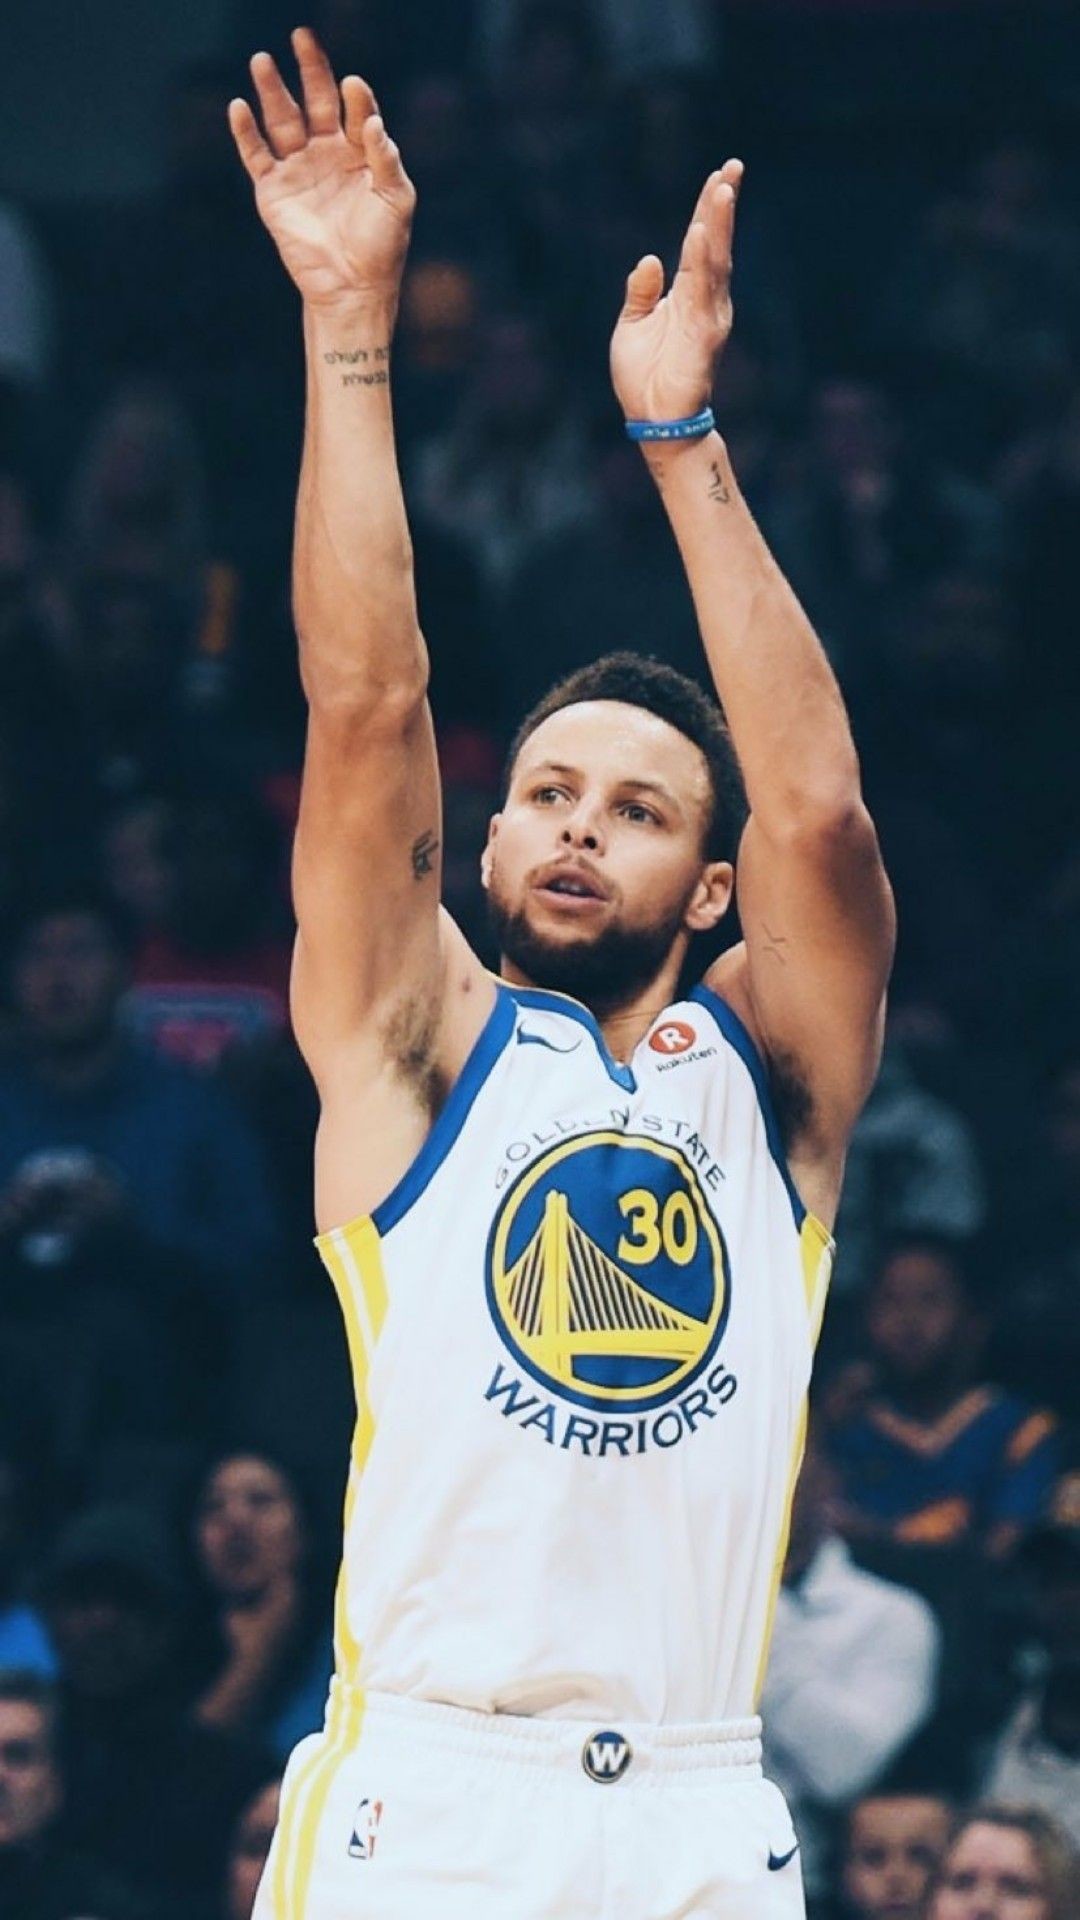 steph curry wallpaper iphone,player,sports,team sport,championship,sports equipment